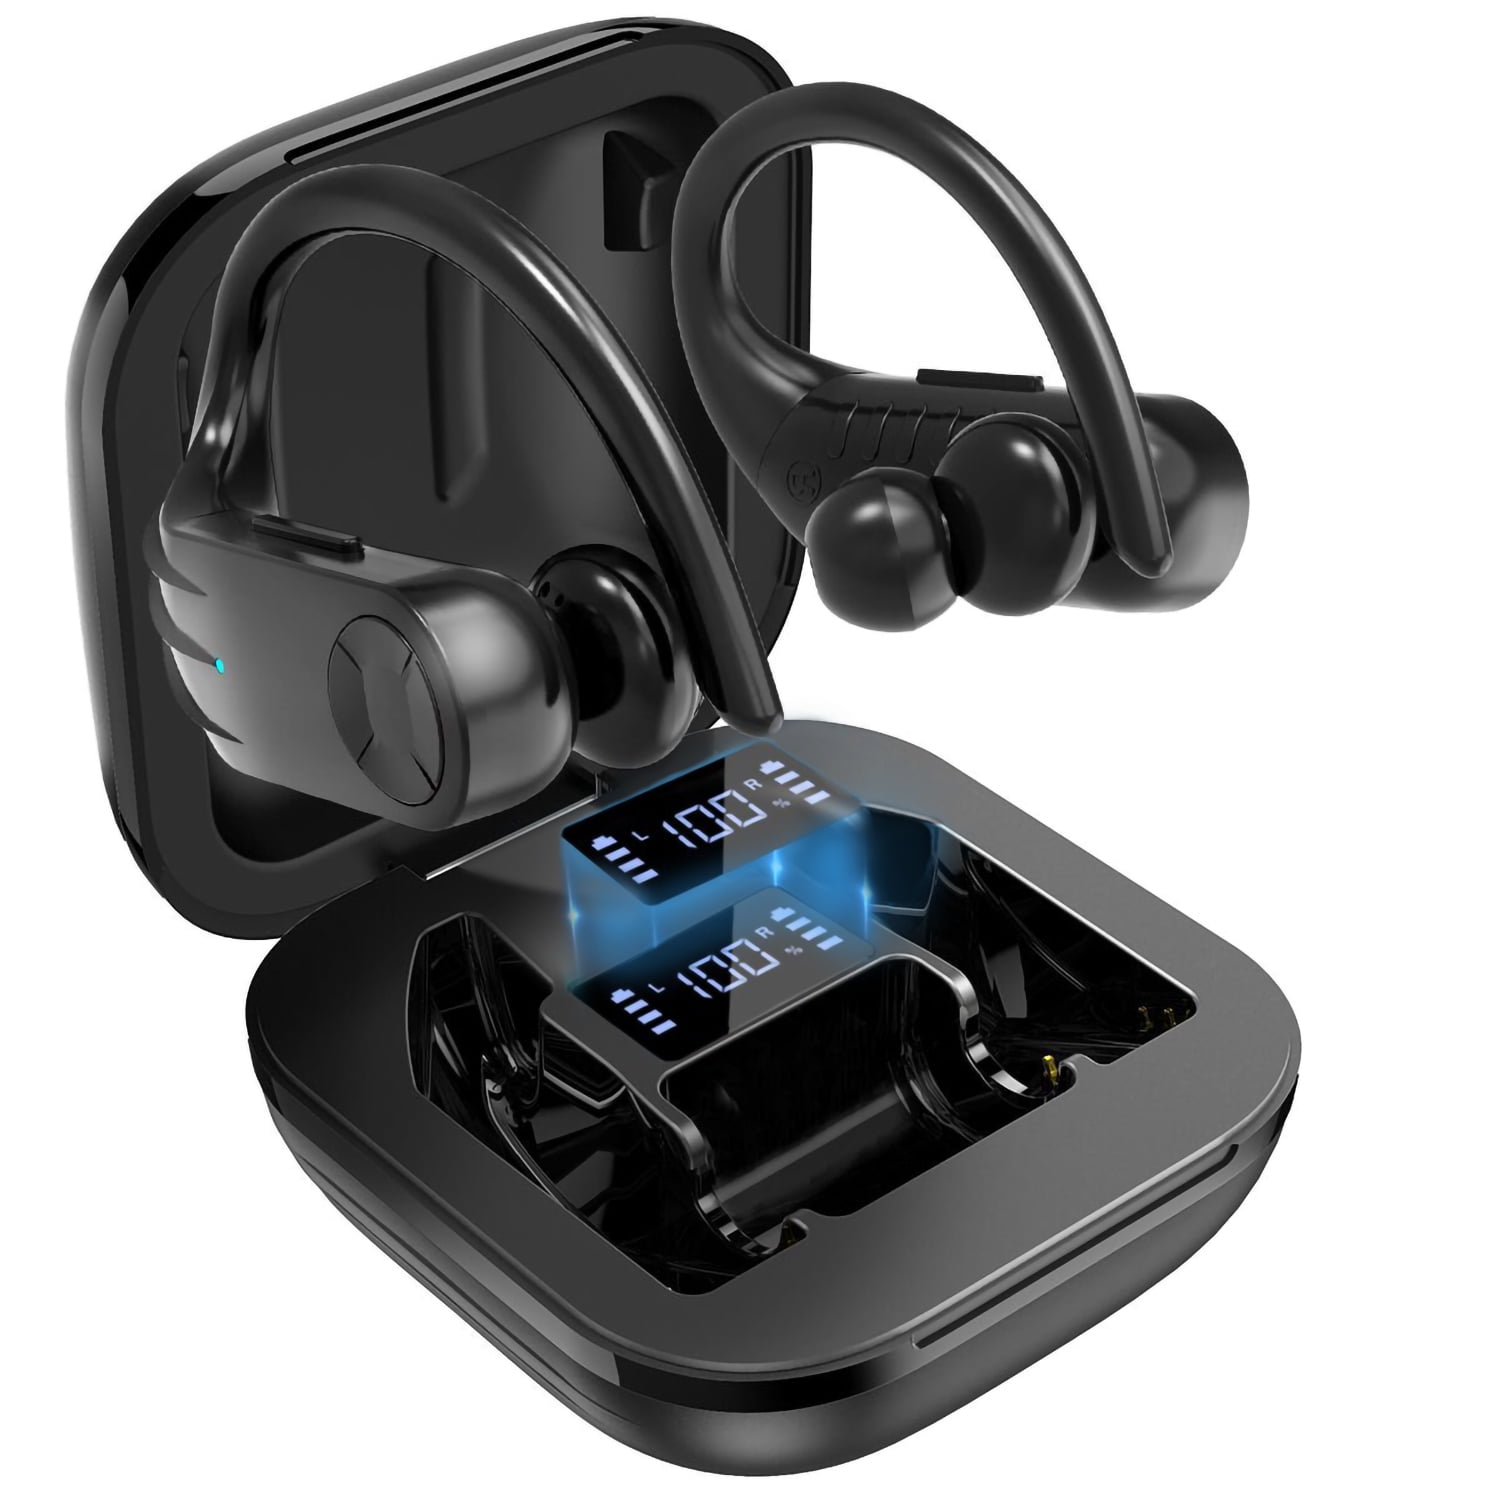 Wireless Earbuds Bluetooth Headphones, 5.0 Built-in Mic in Ear Running Headset with Earhooks Charging Case, Wireless Earphones Compatible with iPhone Samsung Android for Working/Travel/Sports - Walmart.com